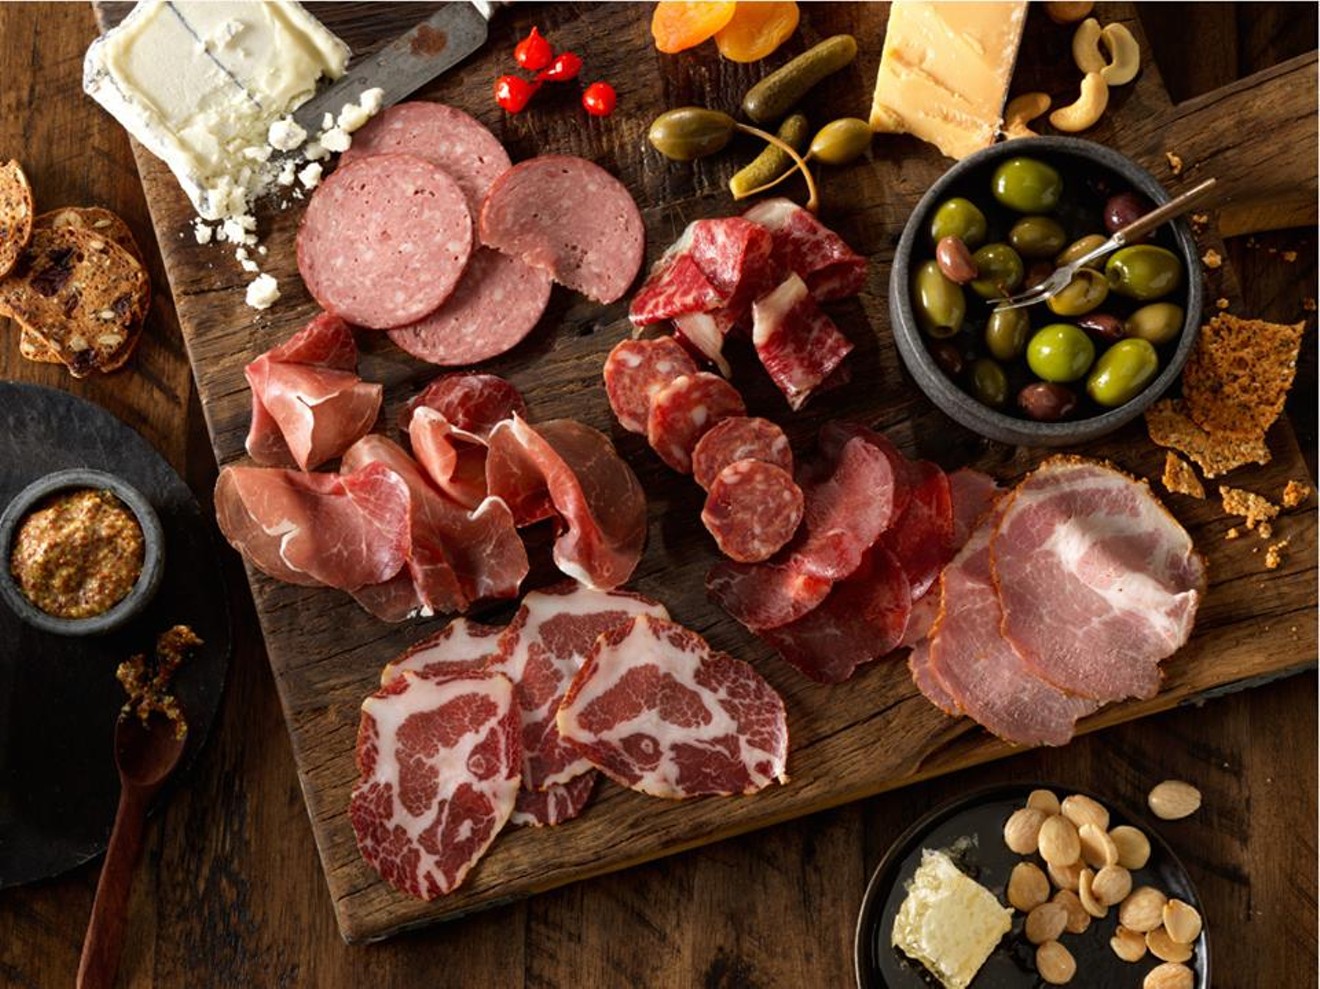 River Bear American Meats will soon have a wide variety of cured and fresh products on  the market.